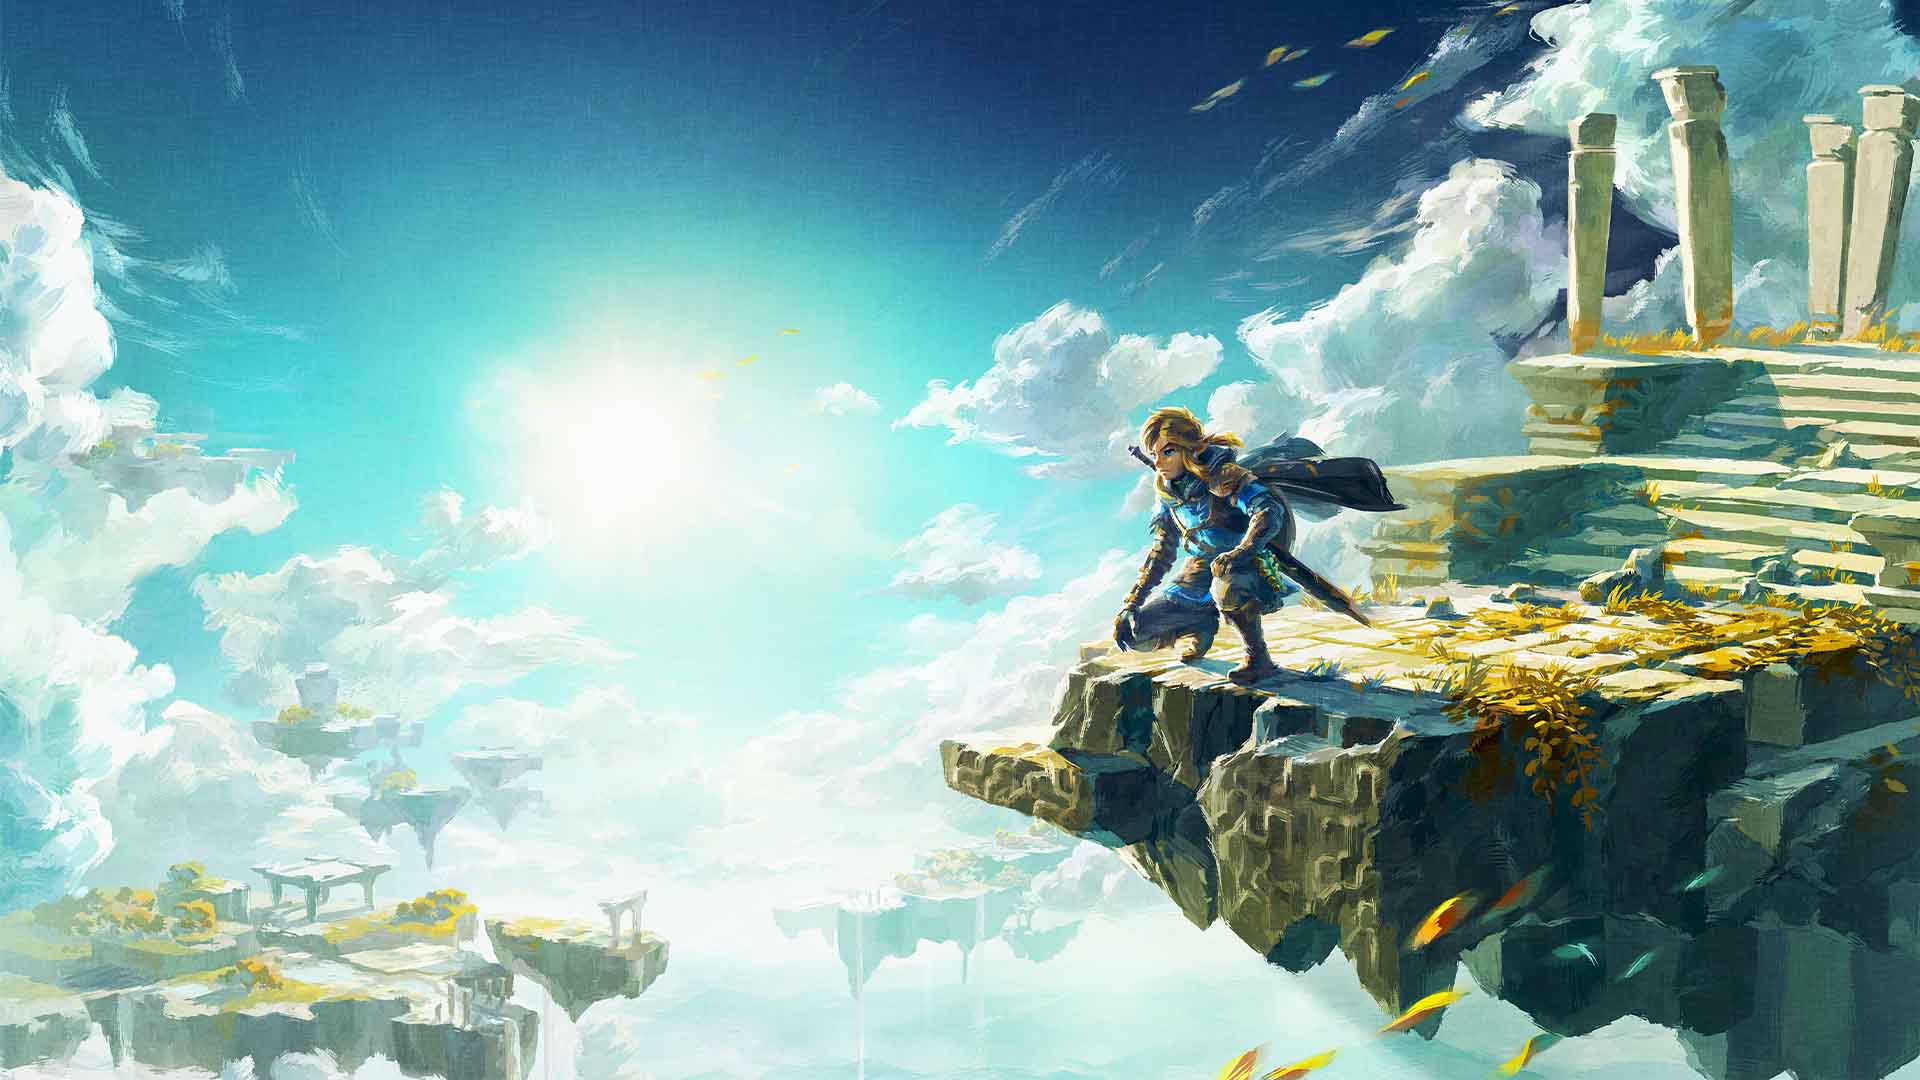 The Legend of Zelda: Tears of the Kingdom review – pure magic